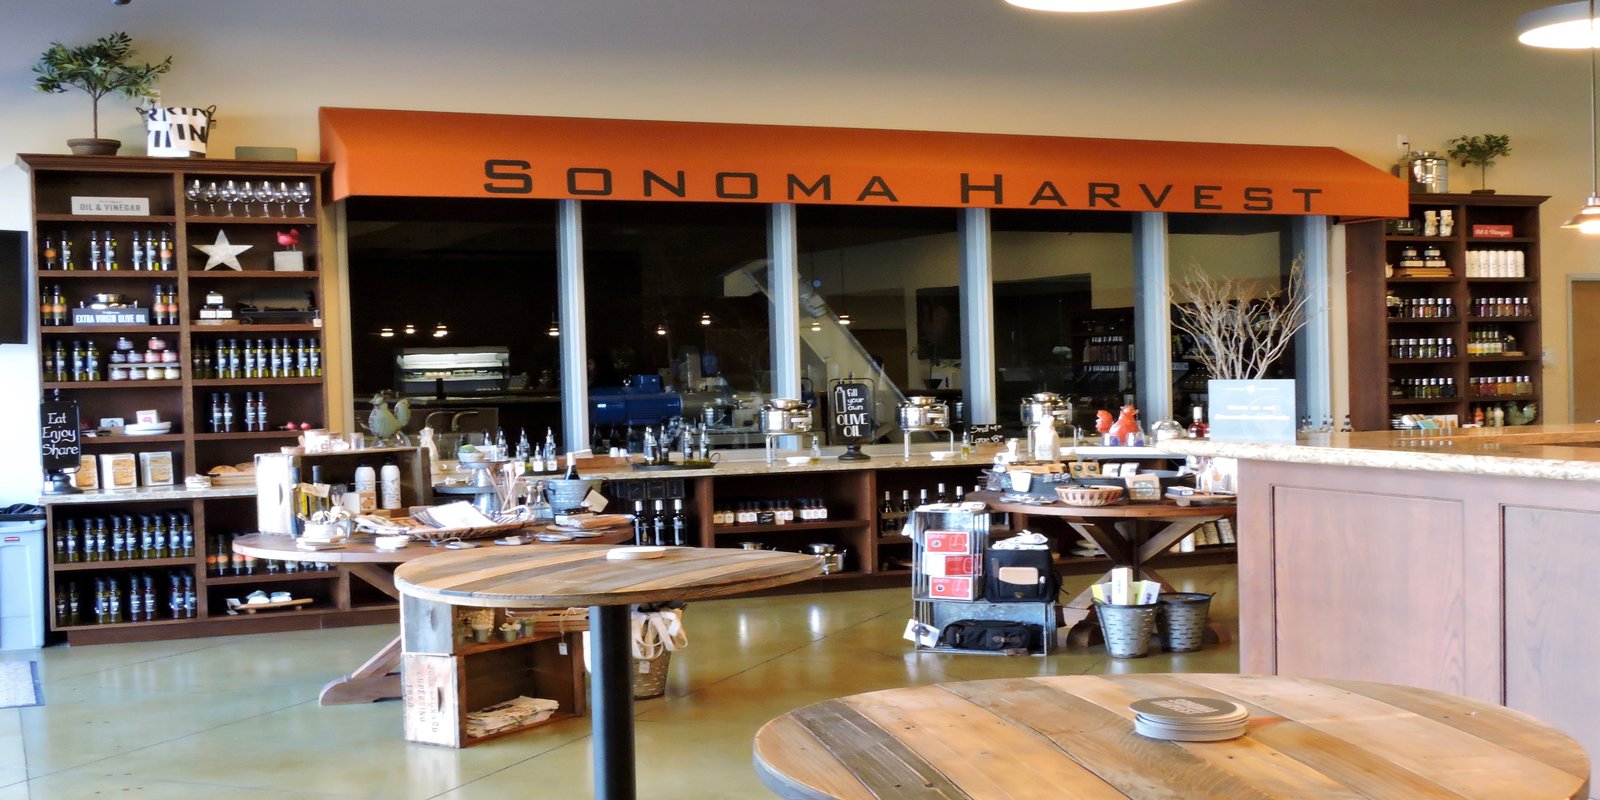 Image of Sonoma Harvest Olive Oil and Winery